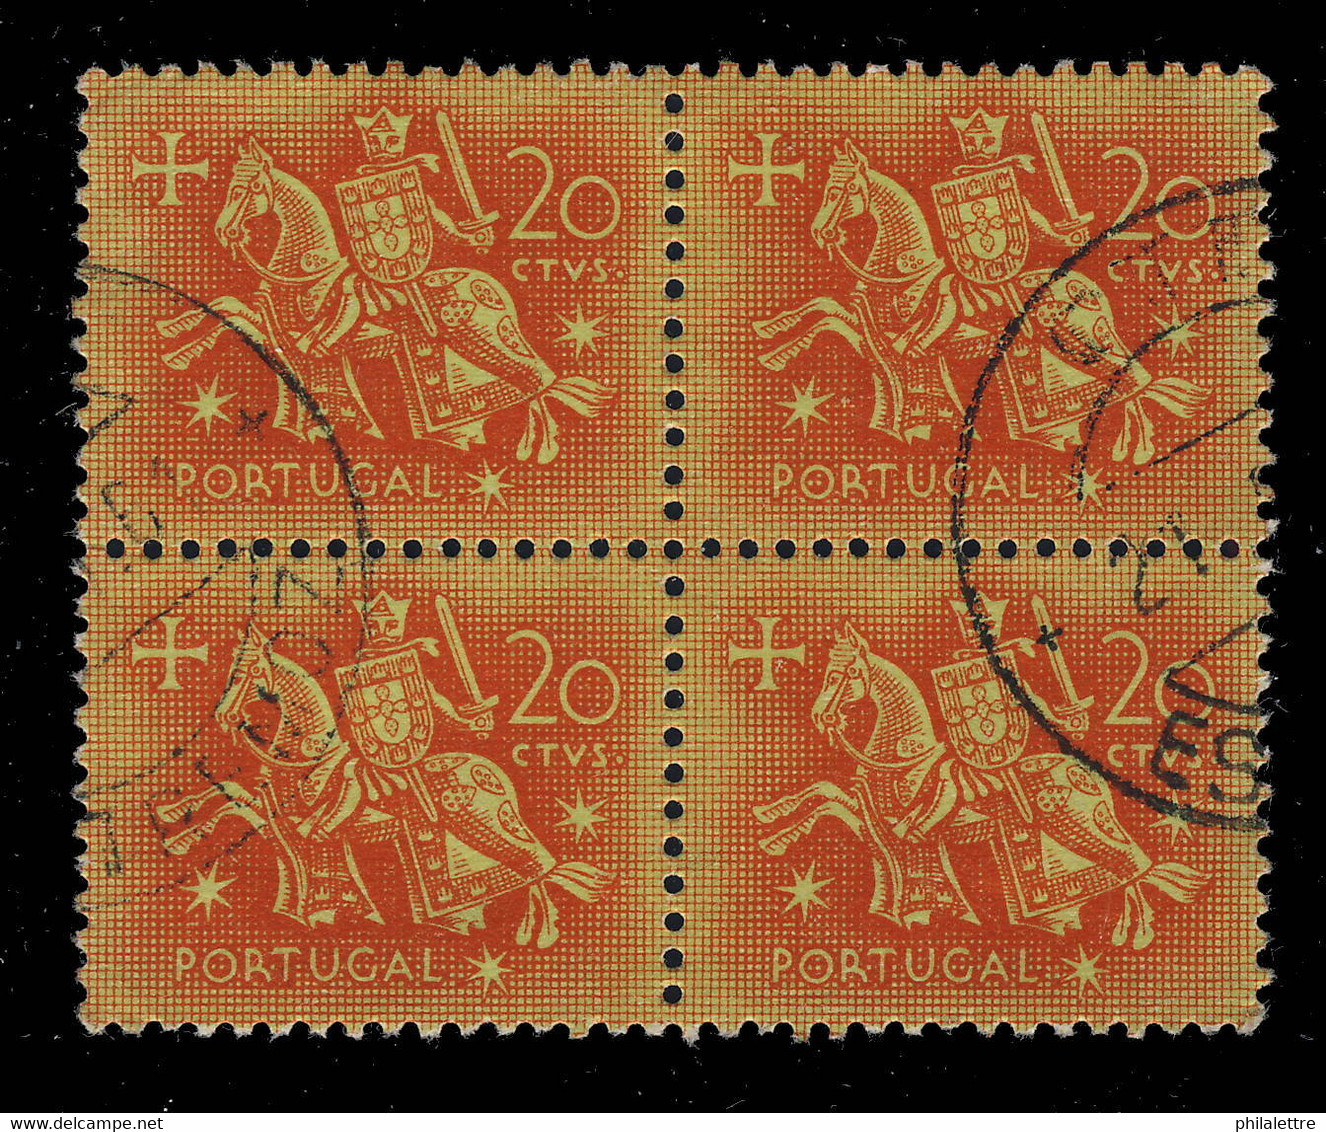 PORTUGAL 1950s/70s RIDER Issue Nice Selection Of Blocks Of 4 SUPERB USED - Oblitérés